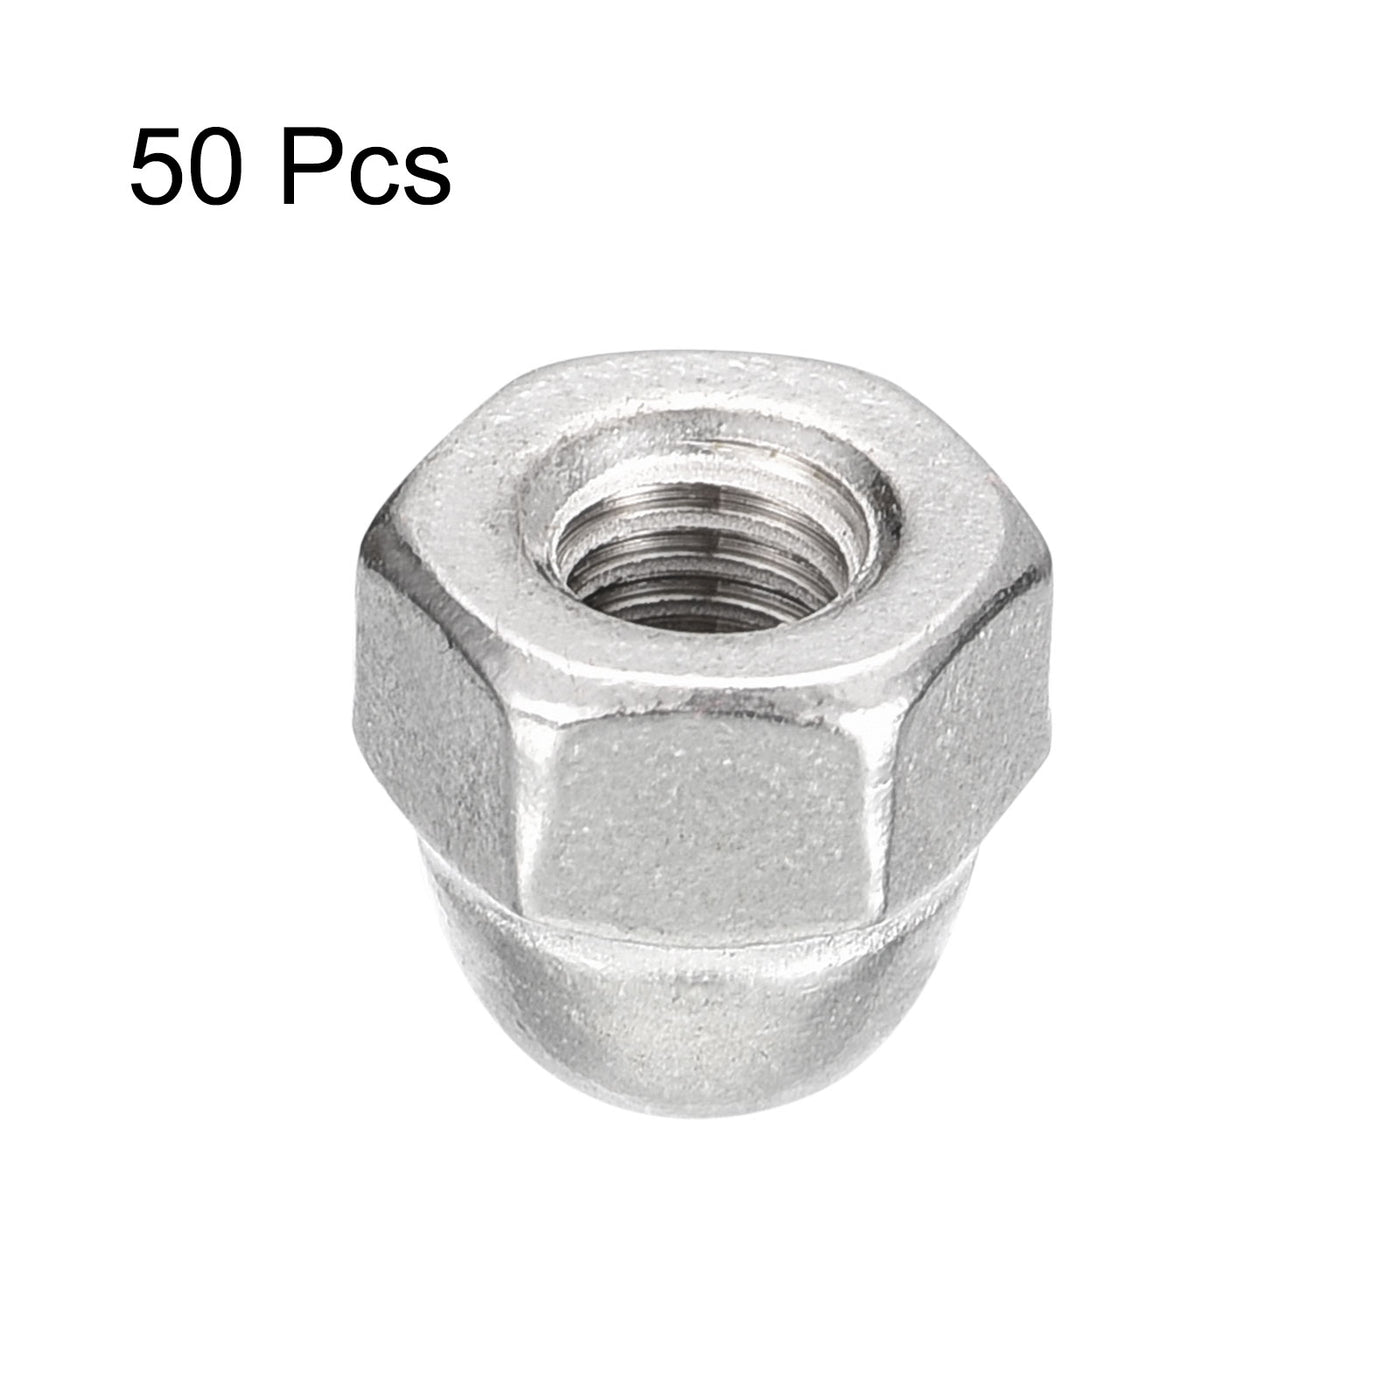 uxcell Uxcell #10-24 Acorn Cap Nuts,50pcs - 304 Stainless Steel Hardware Nuts, Acorn Hex Cap Dome Head Nuts for Fasteners (Silver)